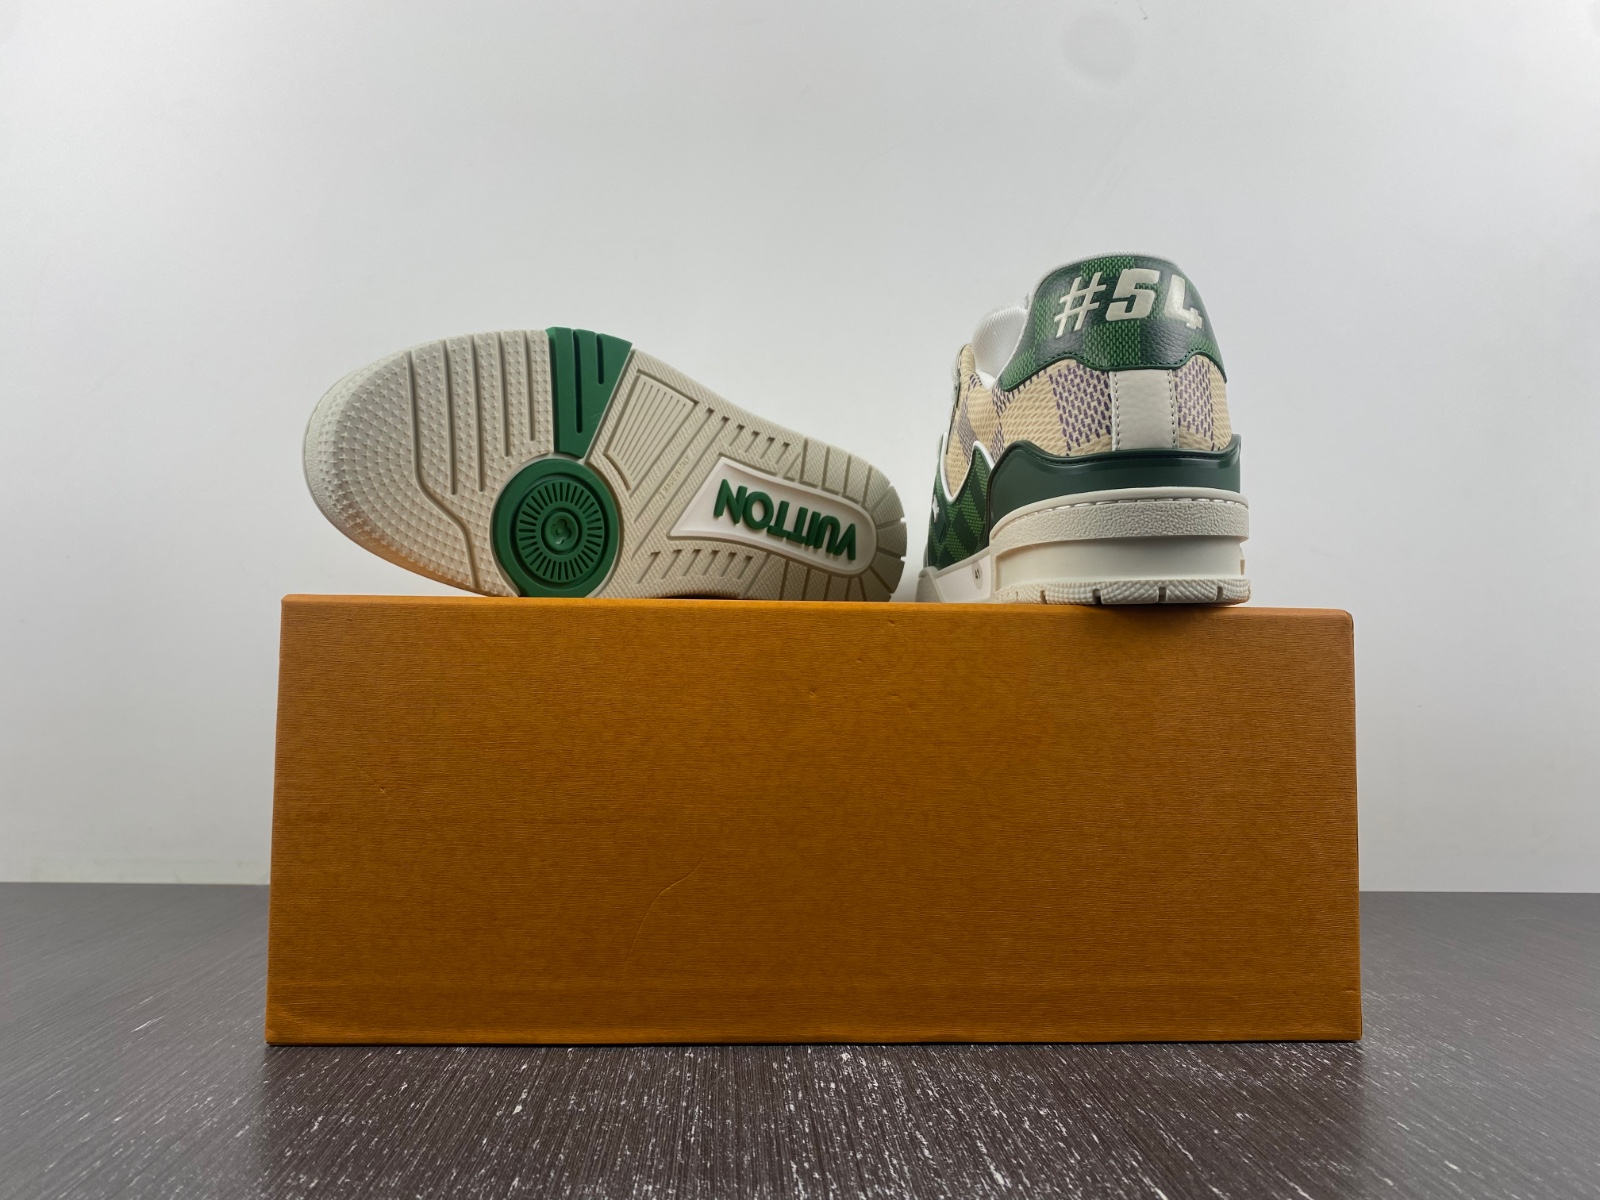 L**V Trainer # 54 New York restrictions White-green-gray checkered color